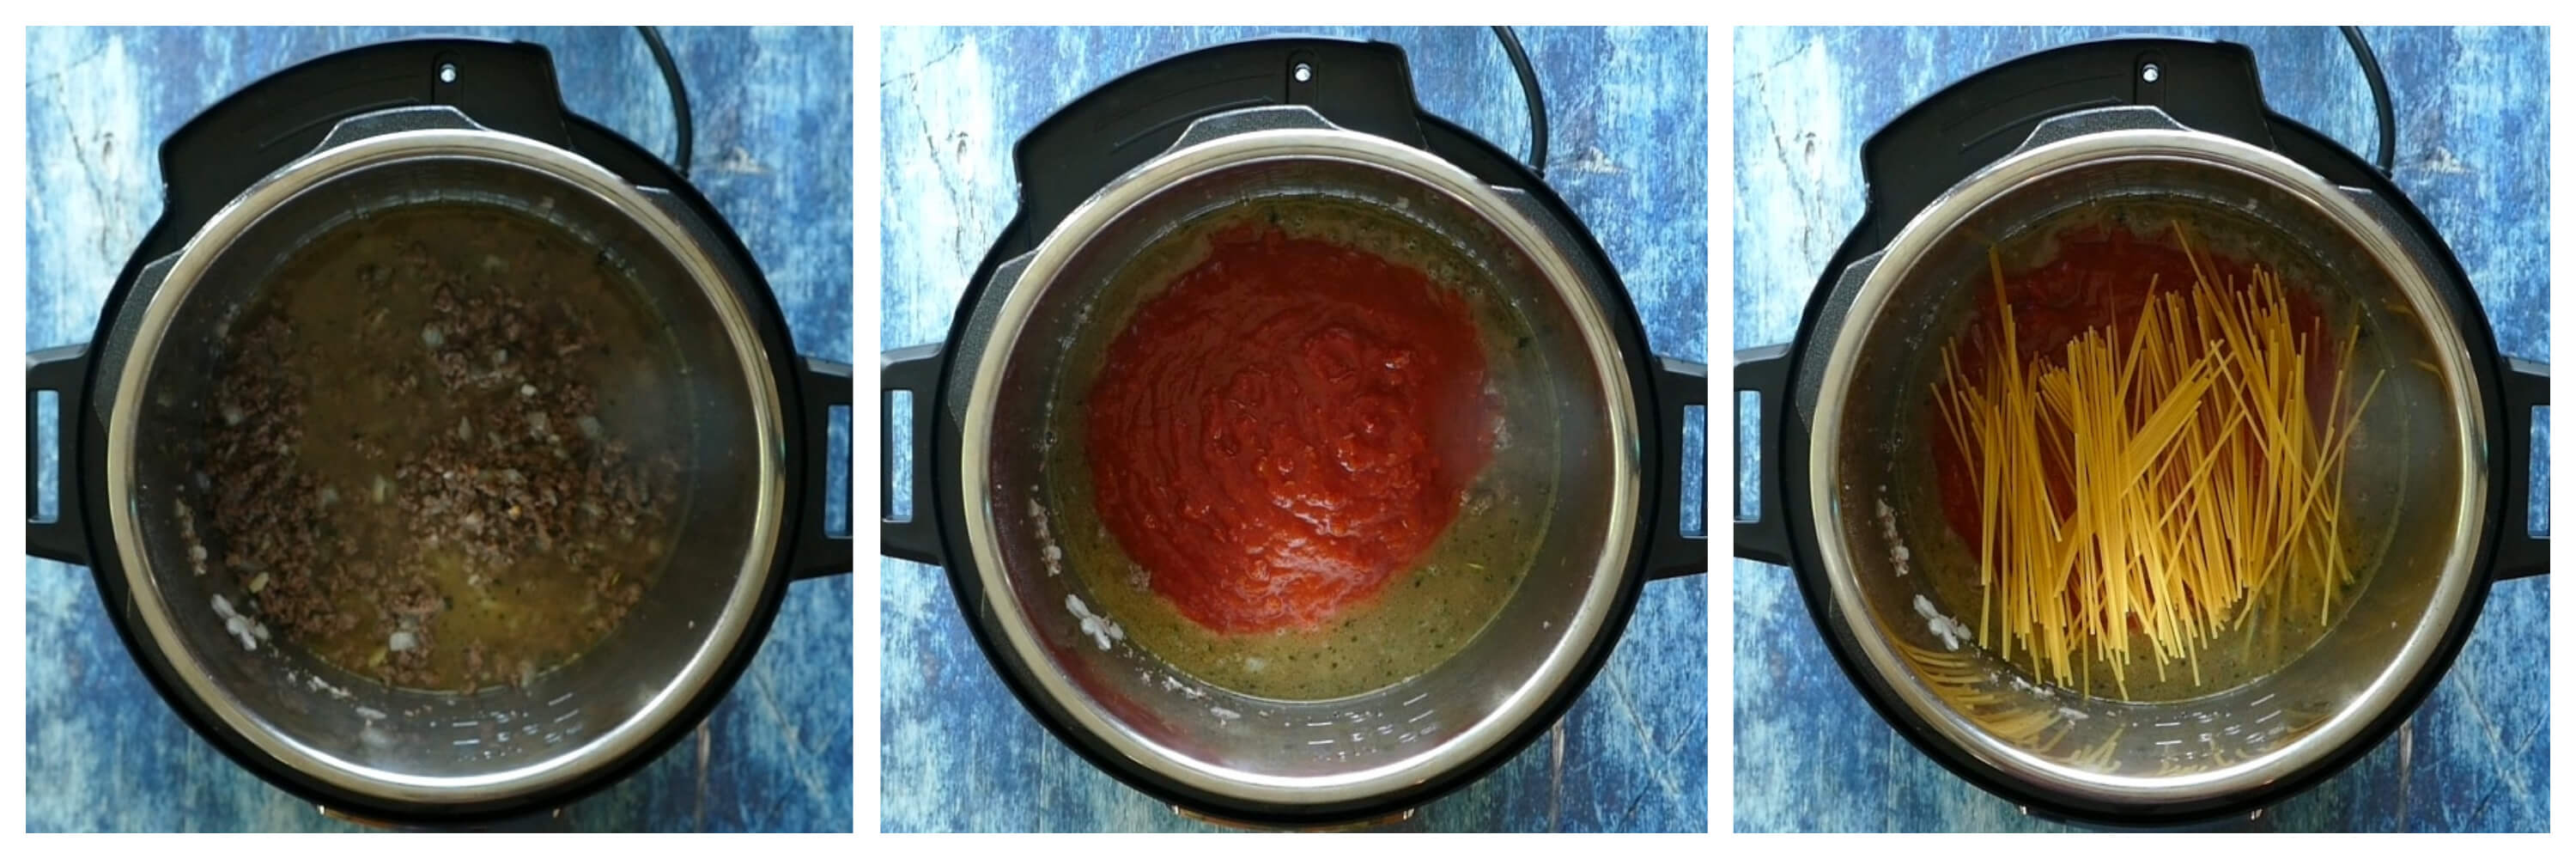 Instant Pot Spaghetti Instructions 4 collage - broth, sauce, one layer spaghetti fanned out - Paint the Kitchen Red